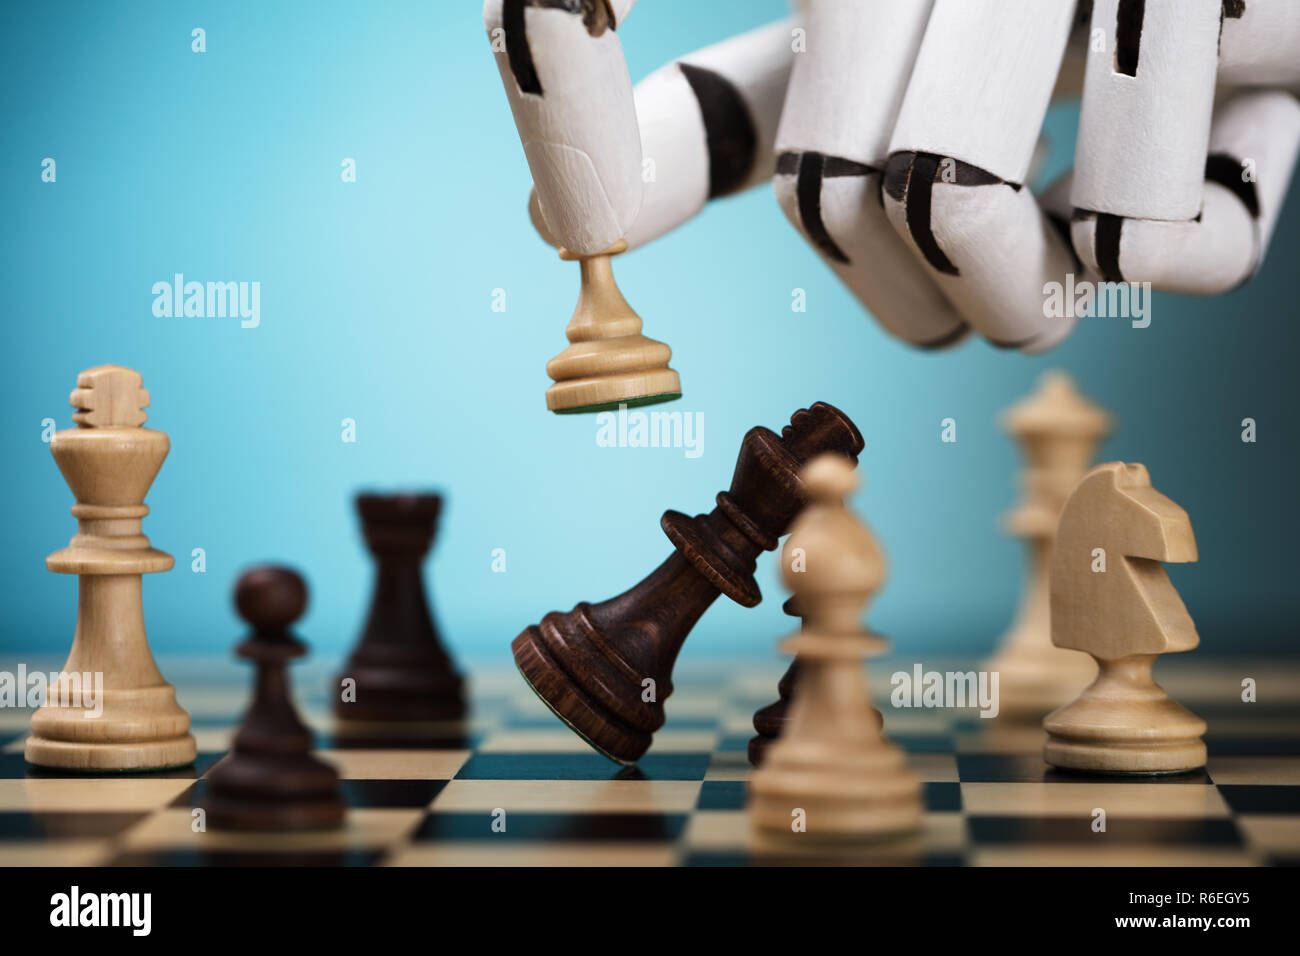 Chess Robot High Resolution Stock Photography and Images - Alamy